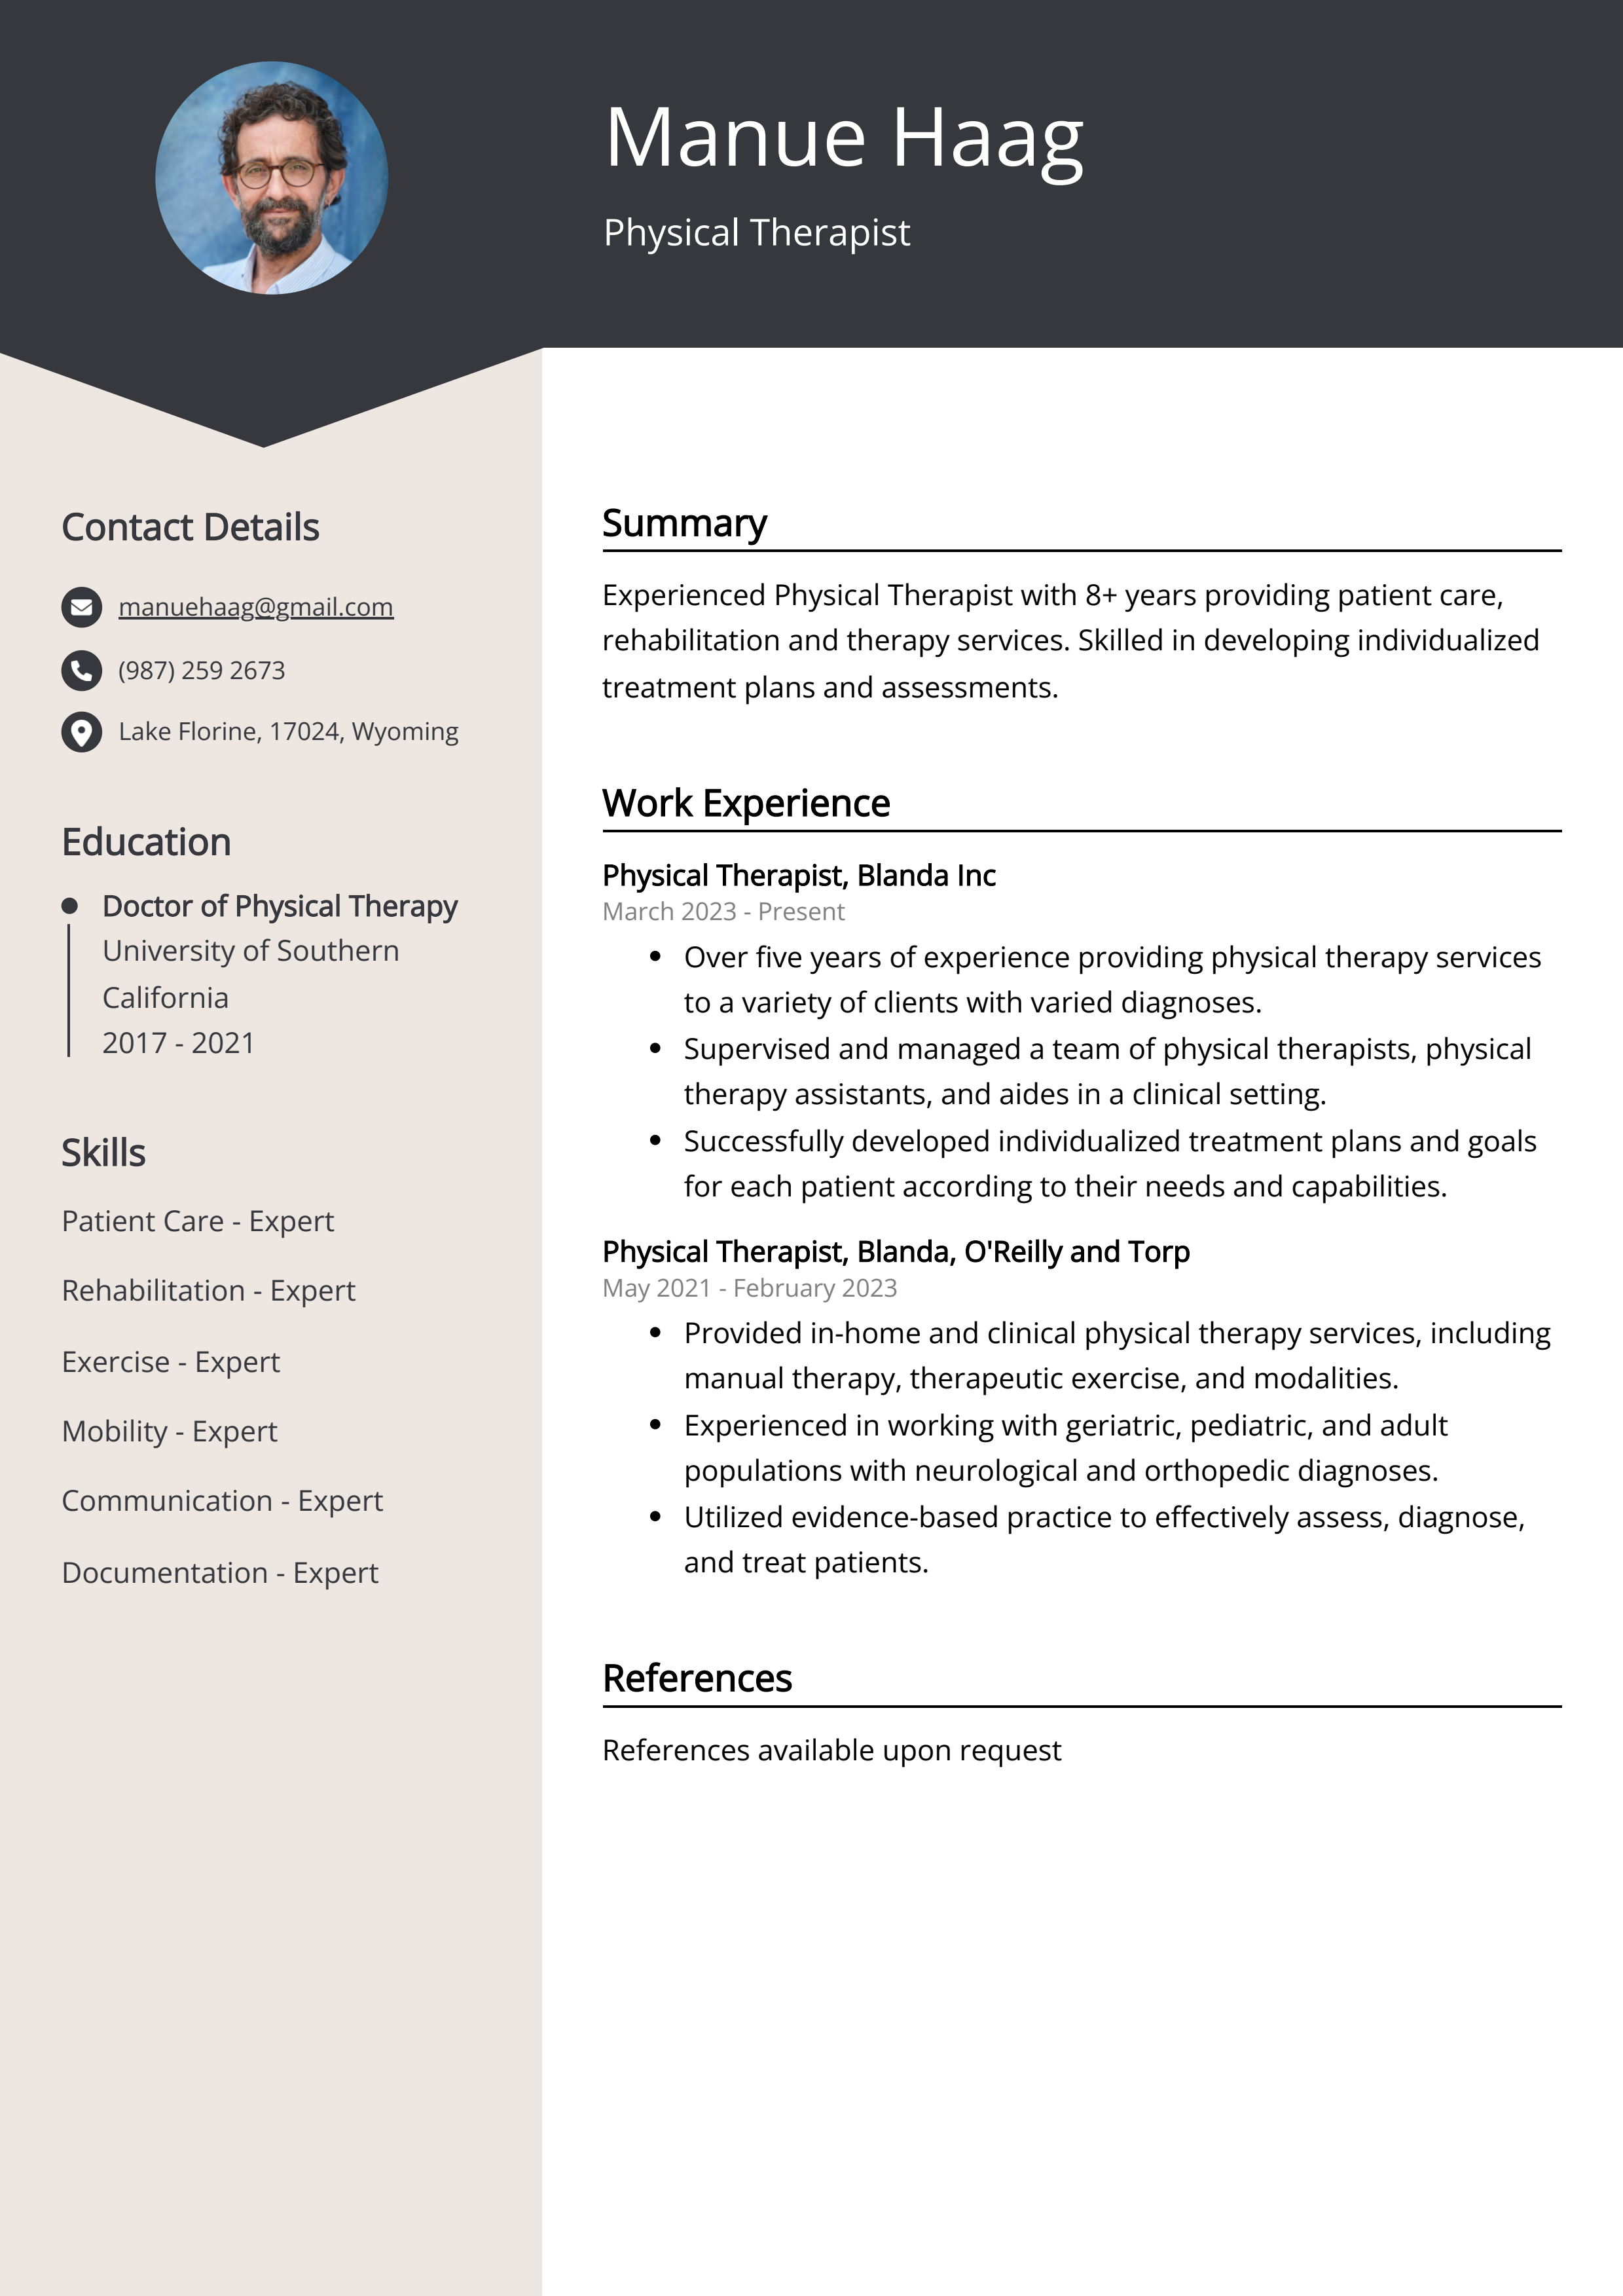 Physical Therapist CV Example